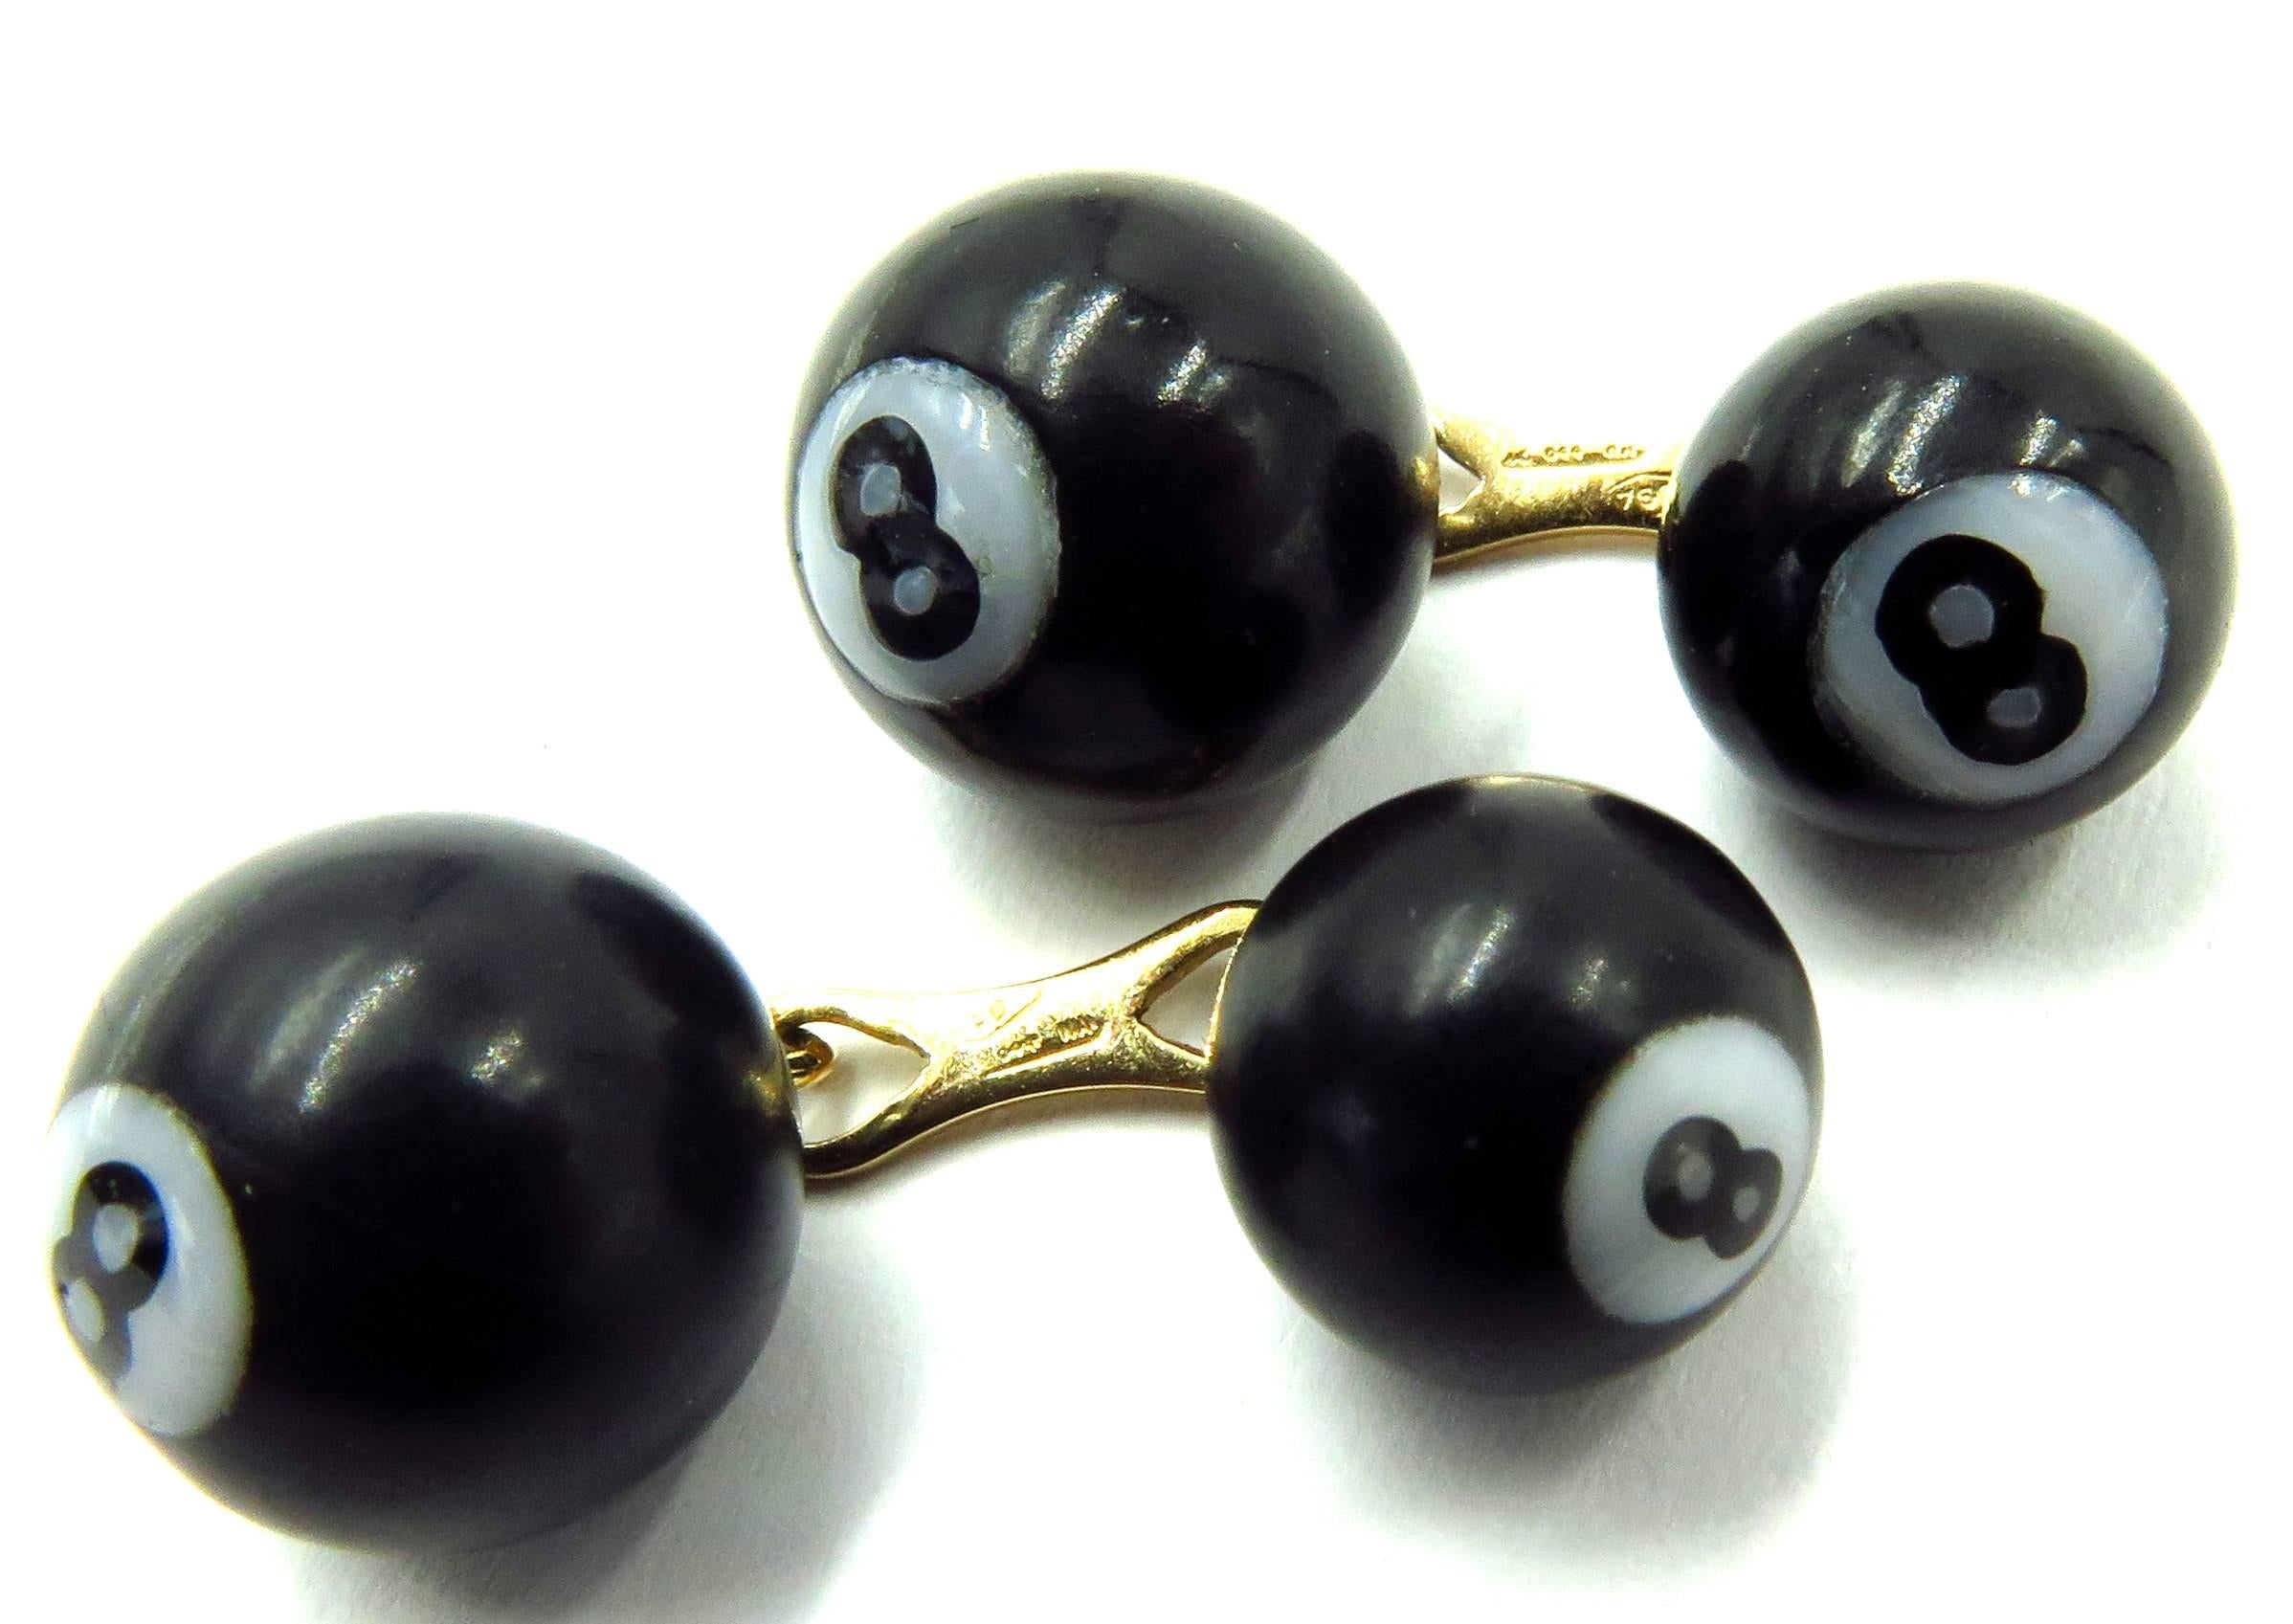 These are the perfect gift for that hard to find chic pool player in your life. Each cufflilnk has a larger 8 ball & a smaller 8 ball with a 18k yellow gold bar in between. Each bar contains 3 hallmarks/makers marks. They are hand carved and made of